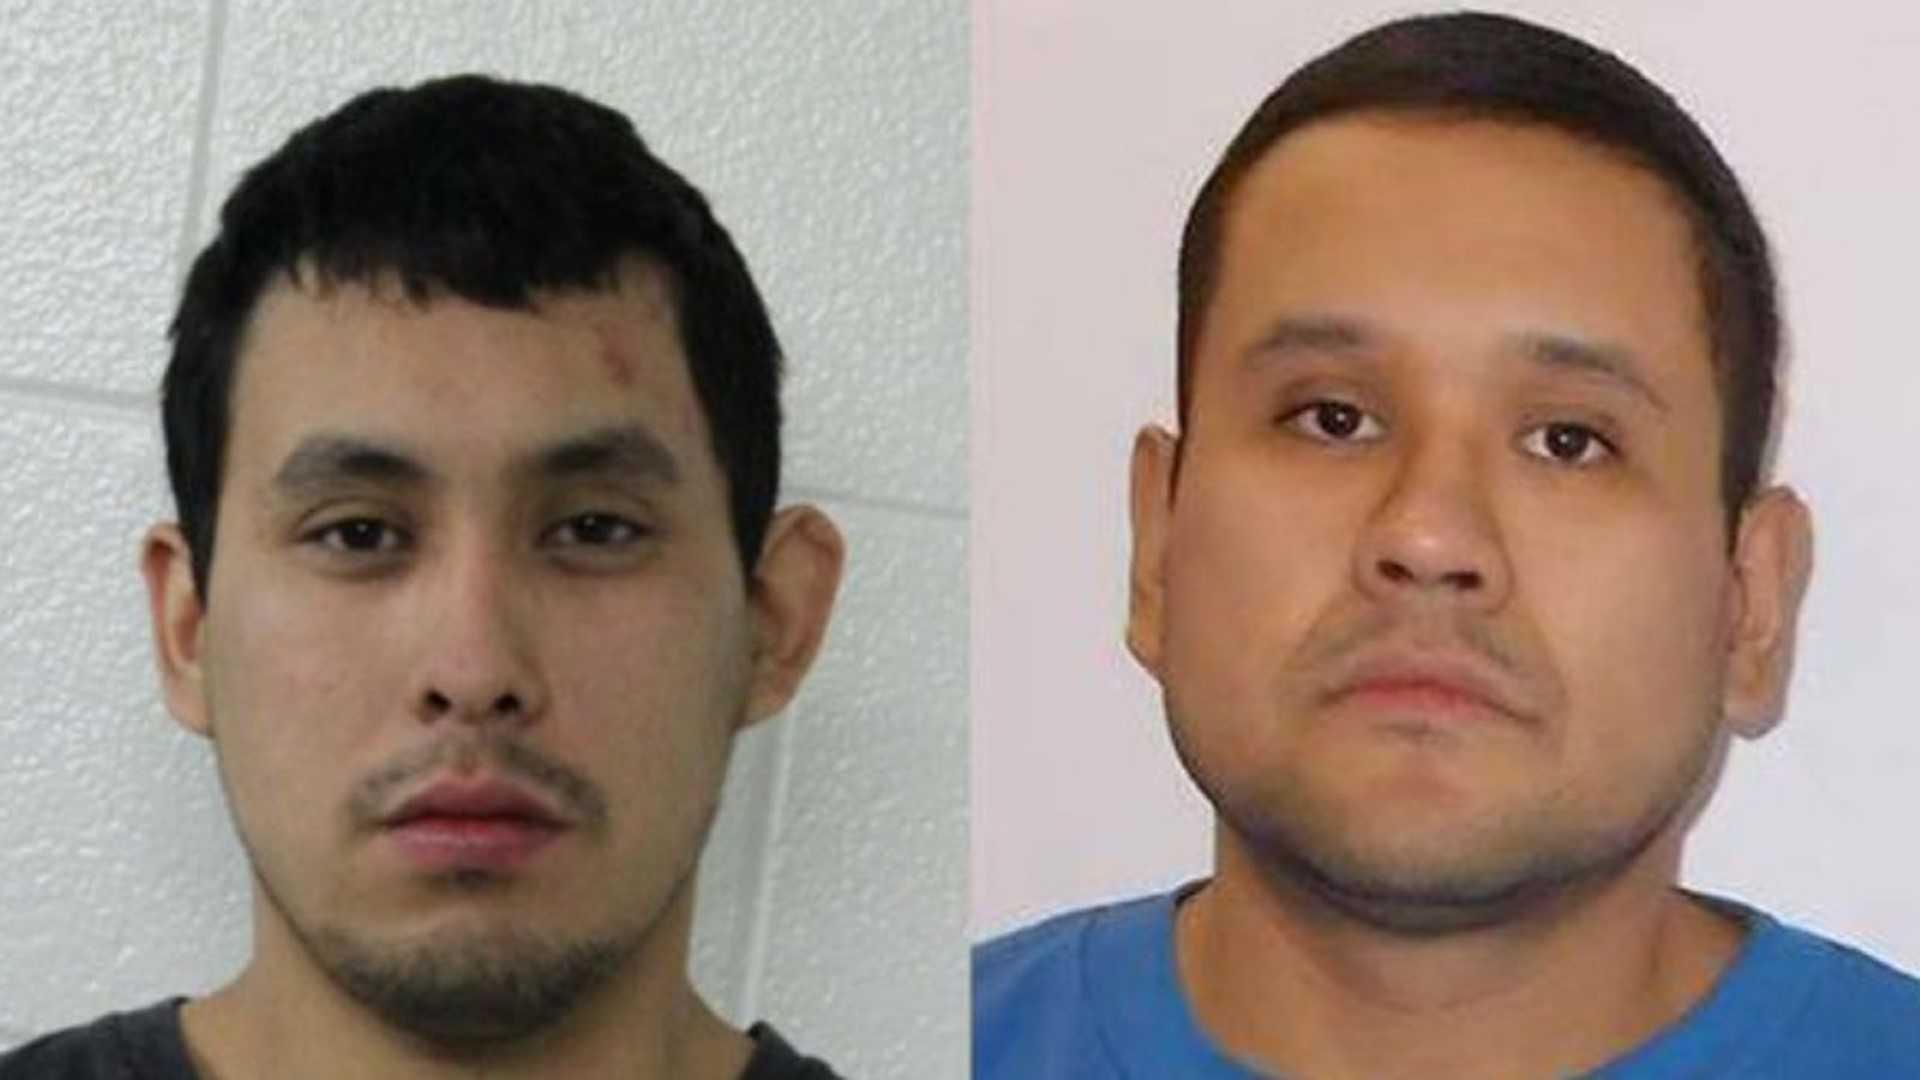 This handout conbination of photos released on Sept 4 by the Saskatchewan Royal Canadian Mounted Police shows Damien Sanderson and Myles Sanderson, the two suspects in the stabbings in the Saskatchewan province in Canada. Photo: AFP